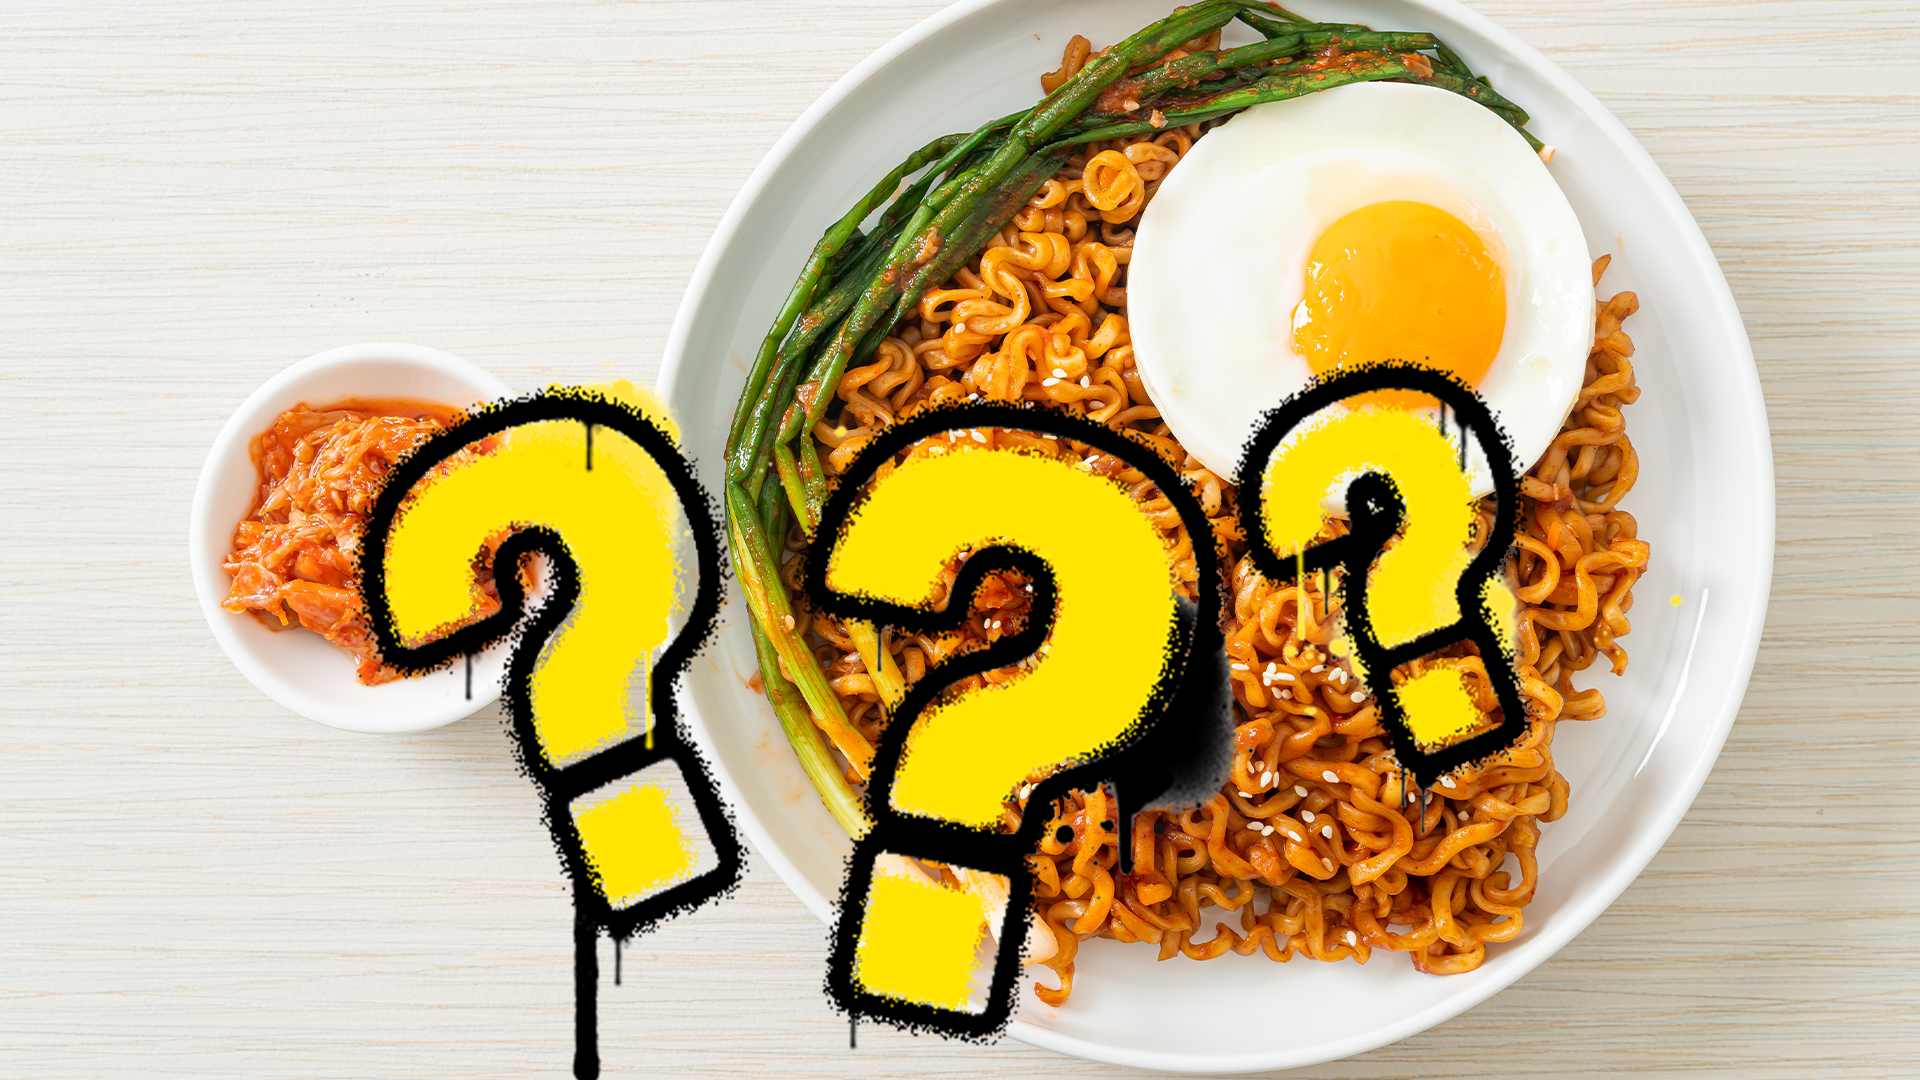 Noodles with question mark